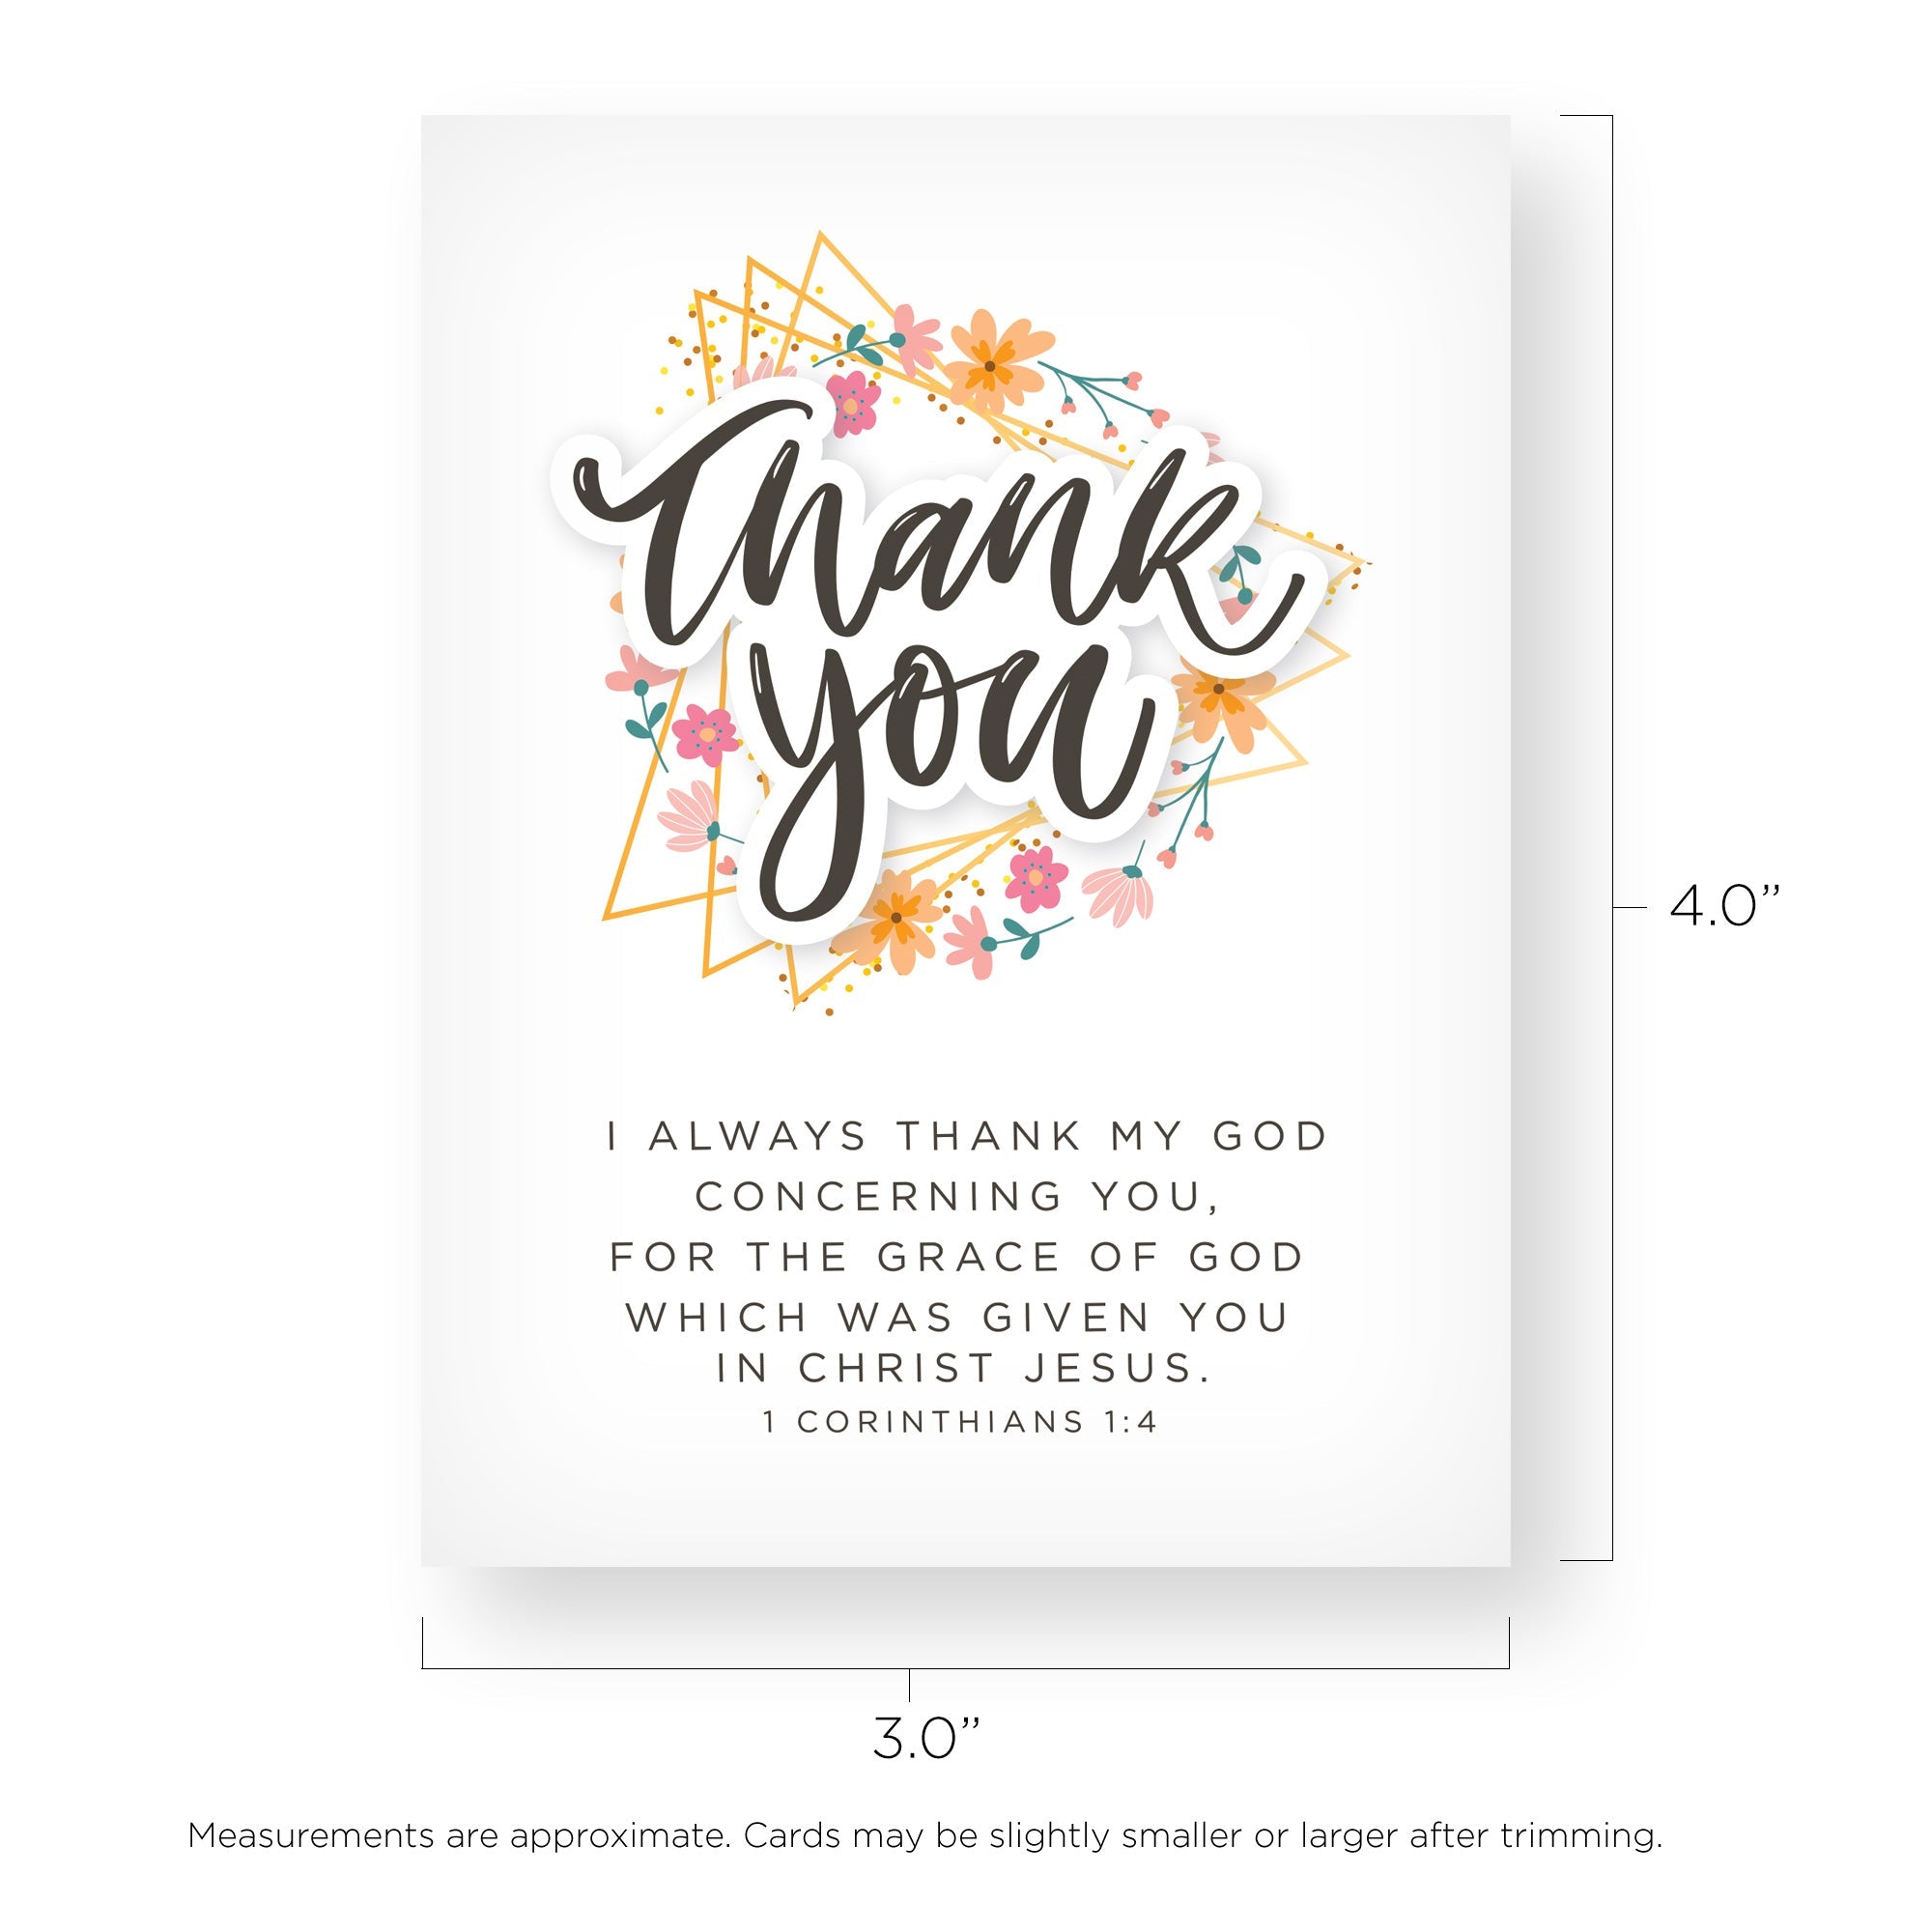 Thank You Cards with 1 Corinthians 1:4